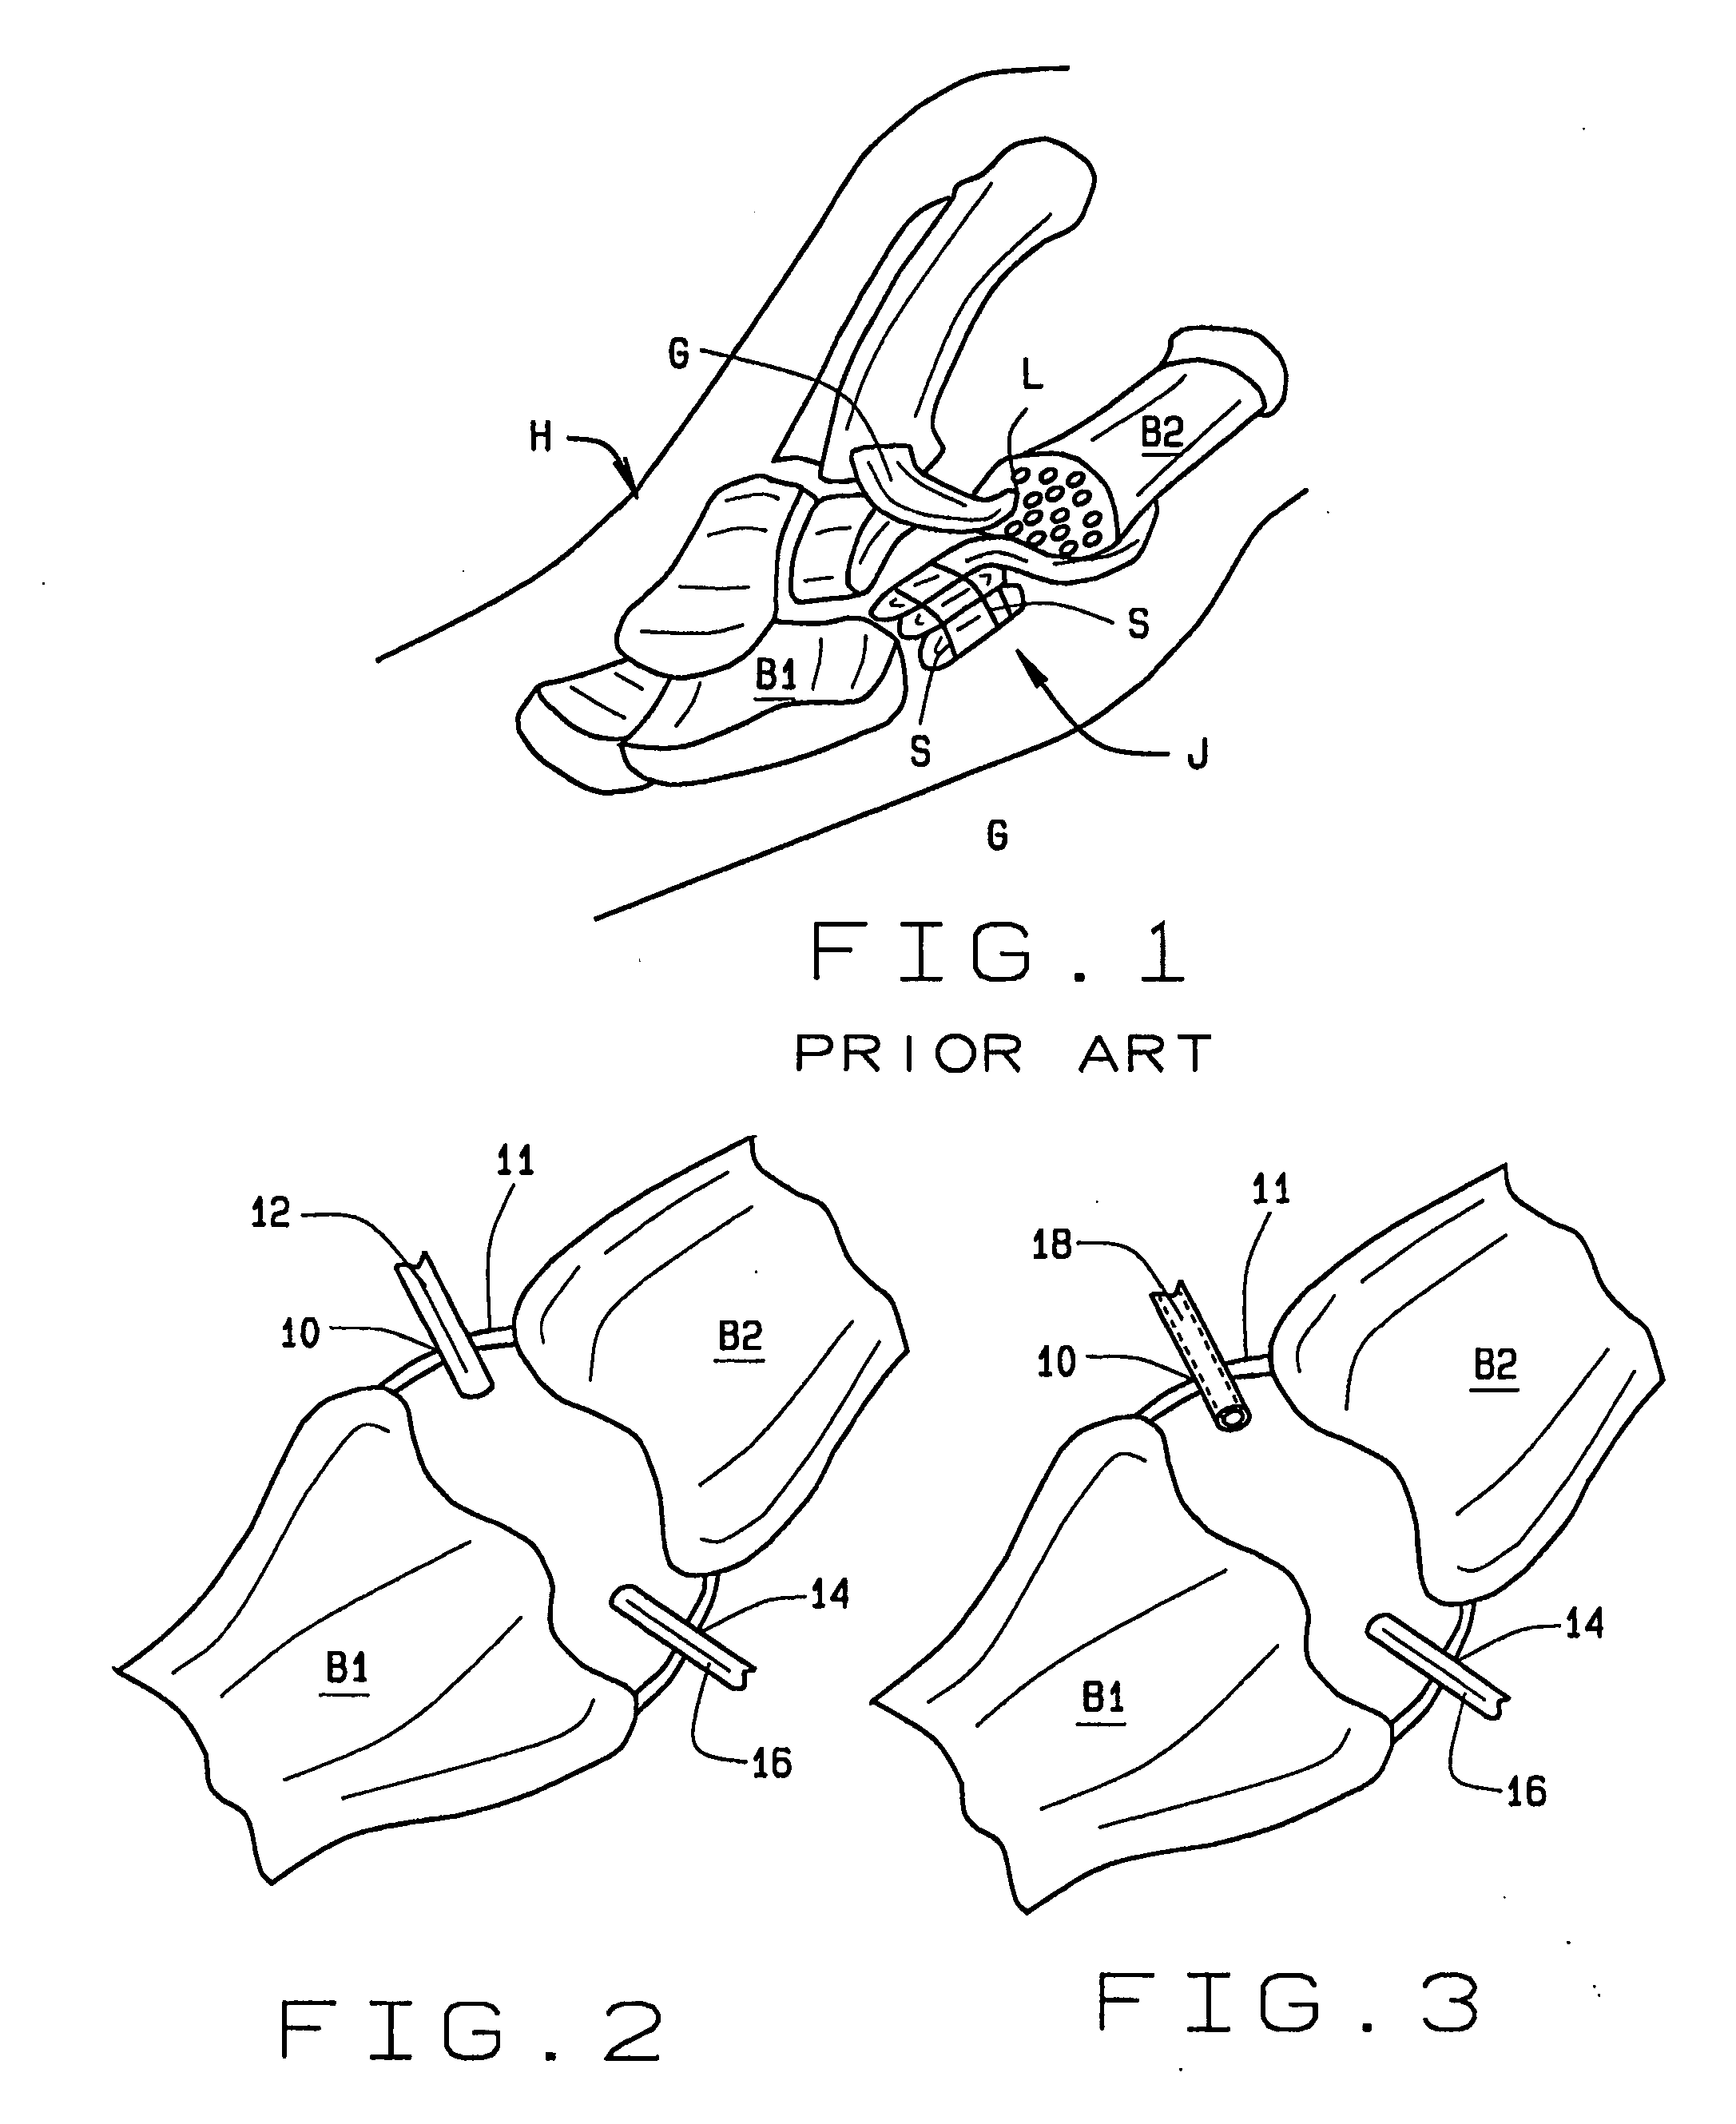 Arthoscopic arthroplasty procedure for the repair or reconstruction of arthritic joints